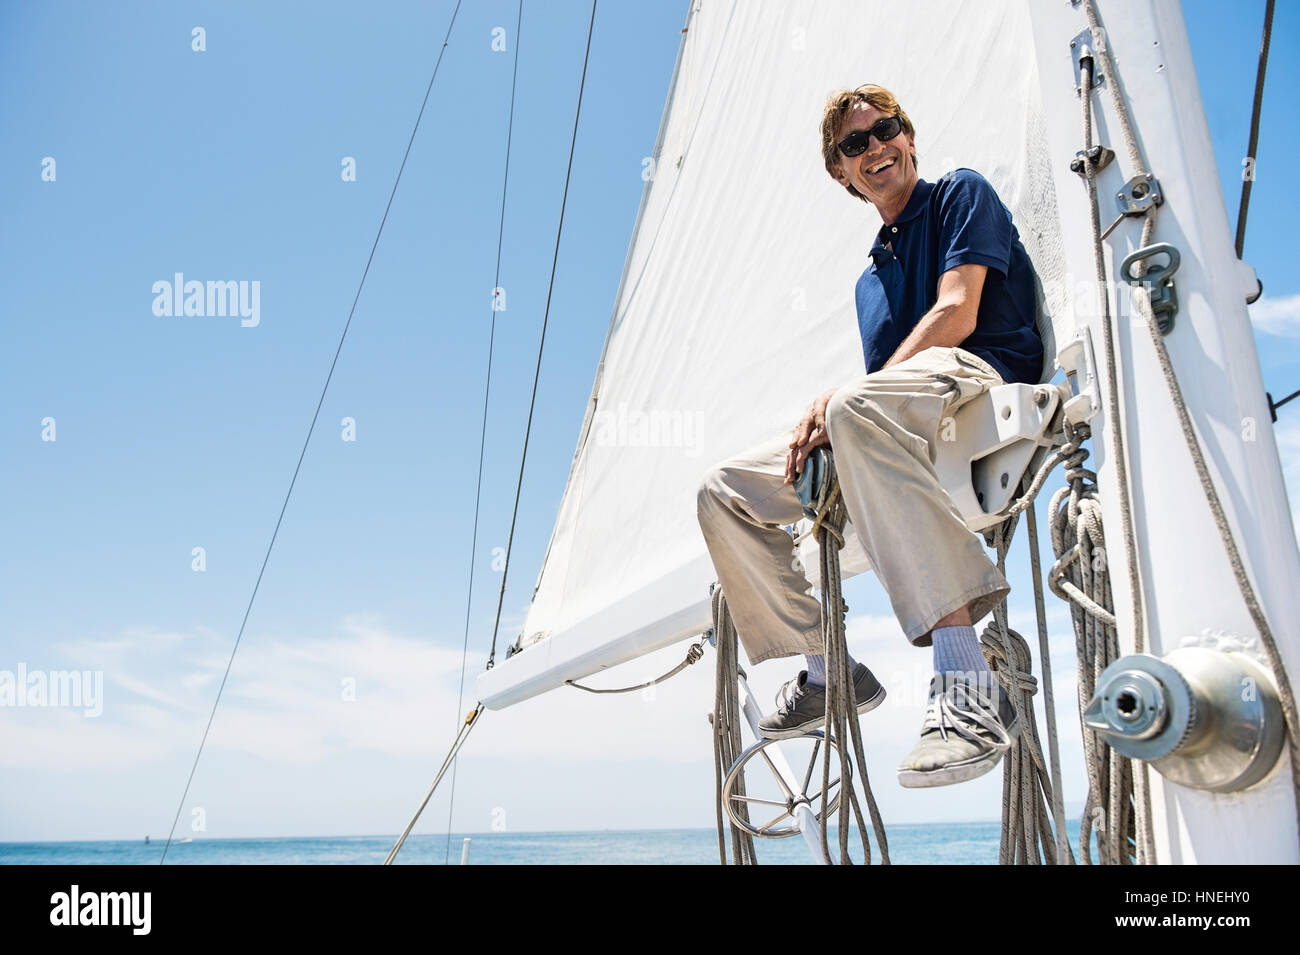 Low angle view of smiling man sitting on yacht boom Stock Photo